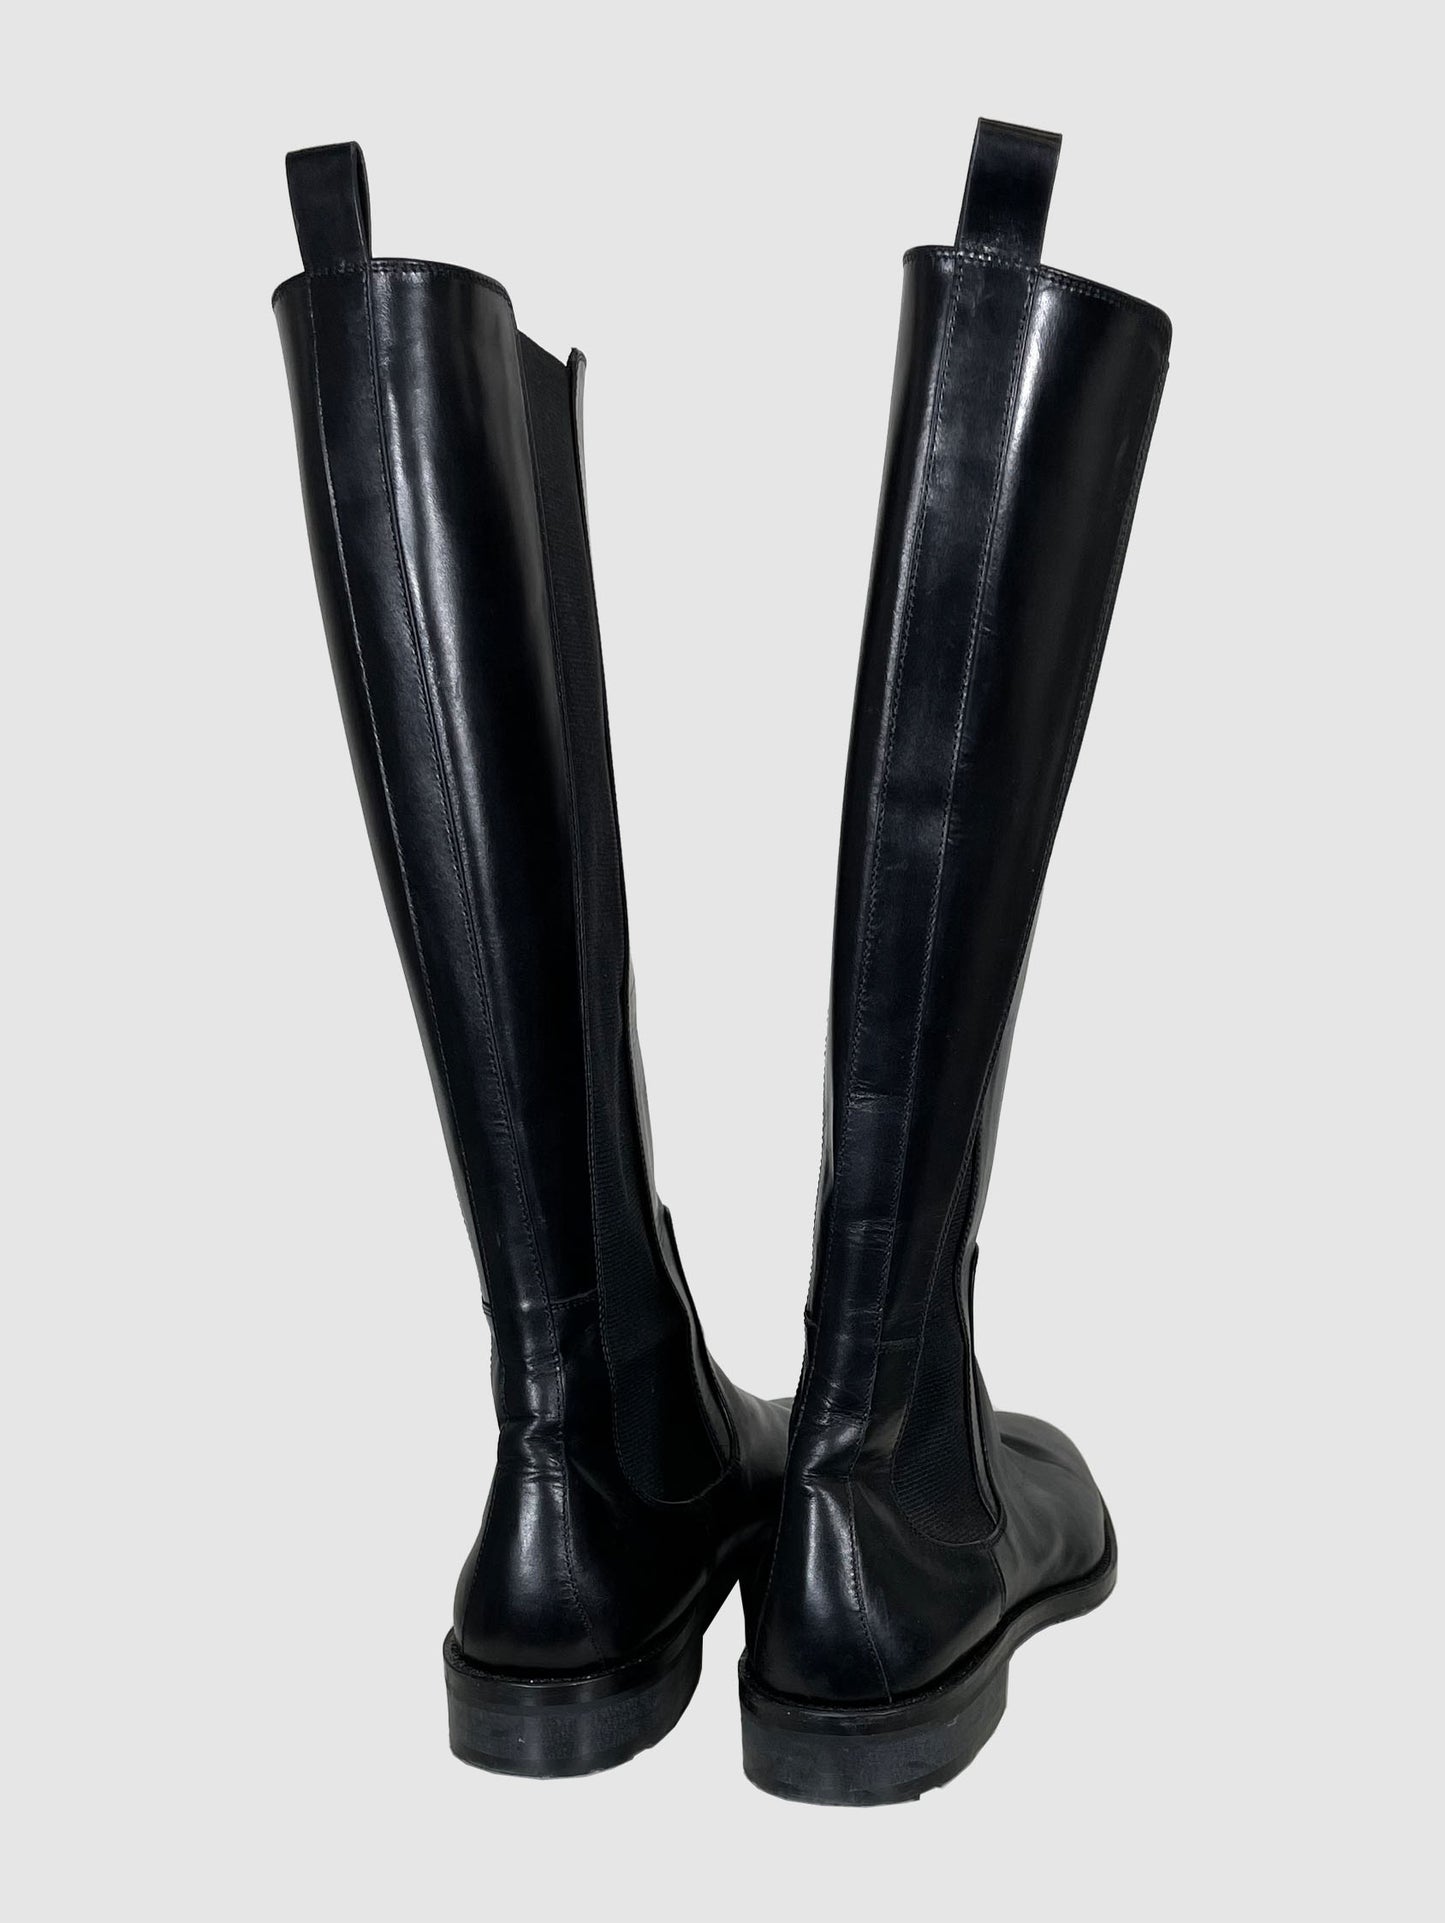 Tall Leather Boots - Size 39.5